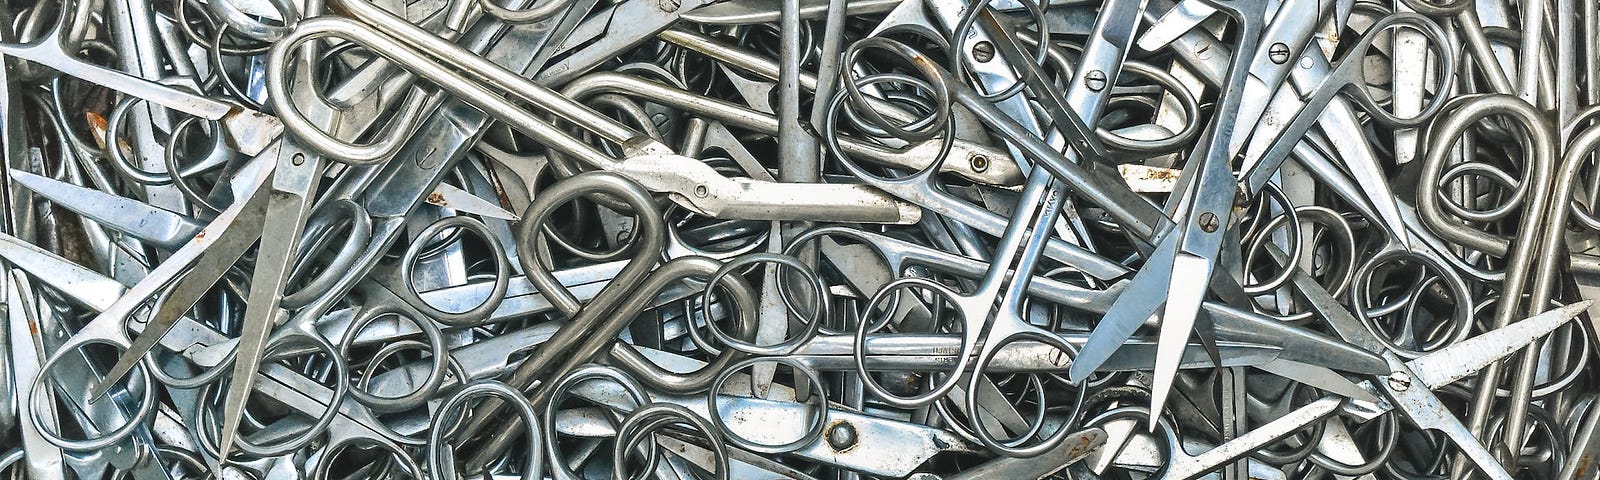 IMAGE: A huge pile of all types of scissors all messed up